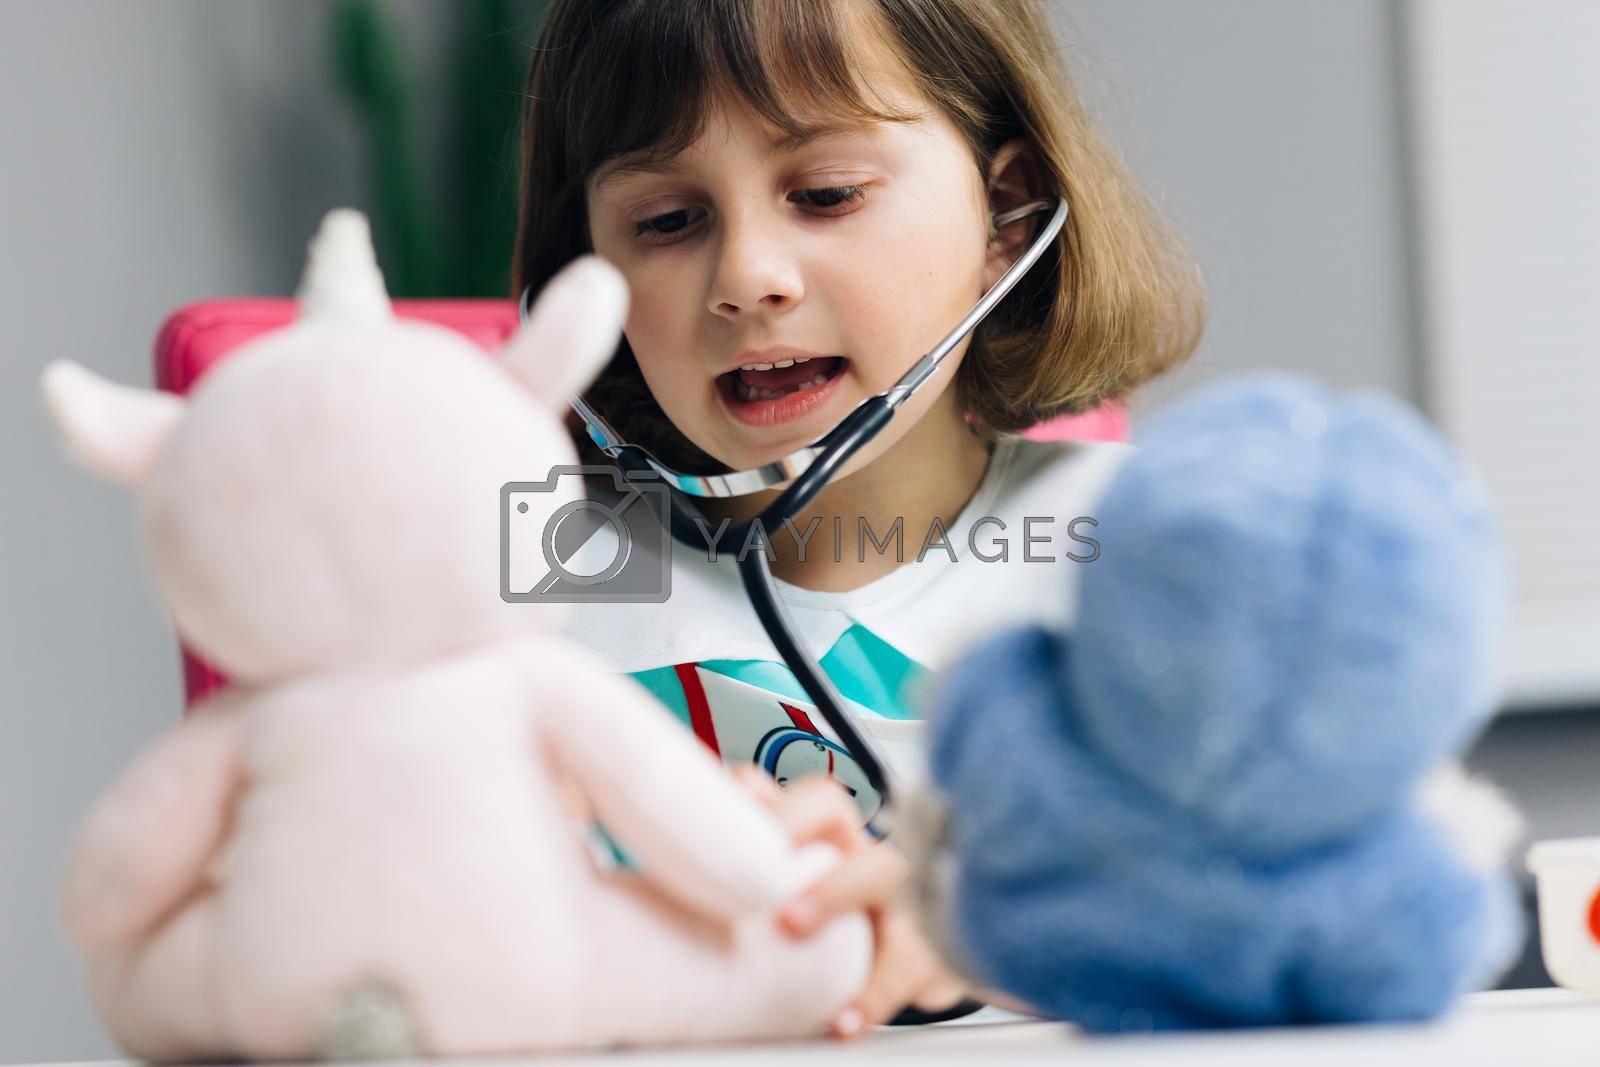 Cute preschool girl kid wearing medical uniform, listening to pets breathing, parrots and toy patients. Child playing hospital game pretending to be doctor, veterinarian, doctor treat homeless animals